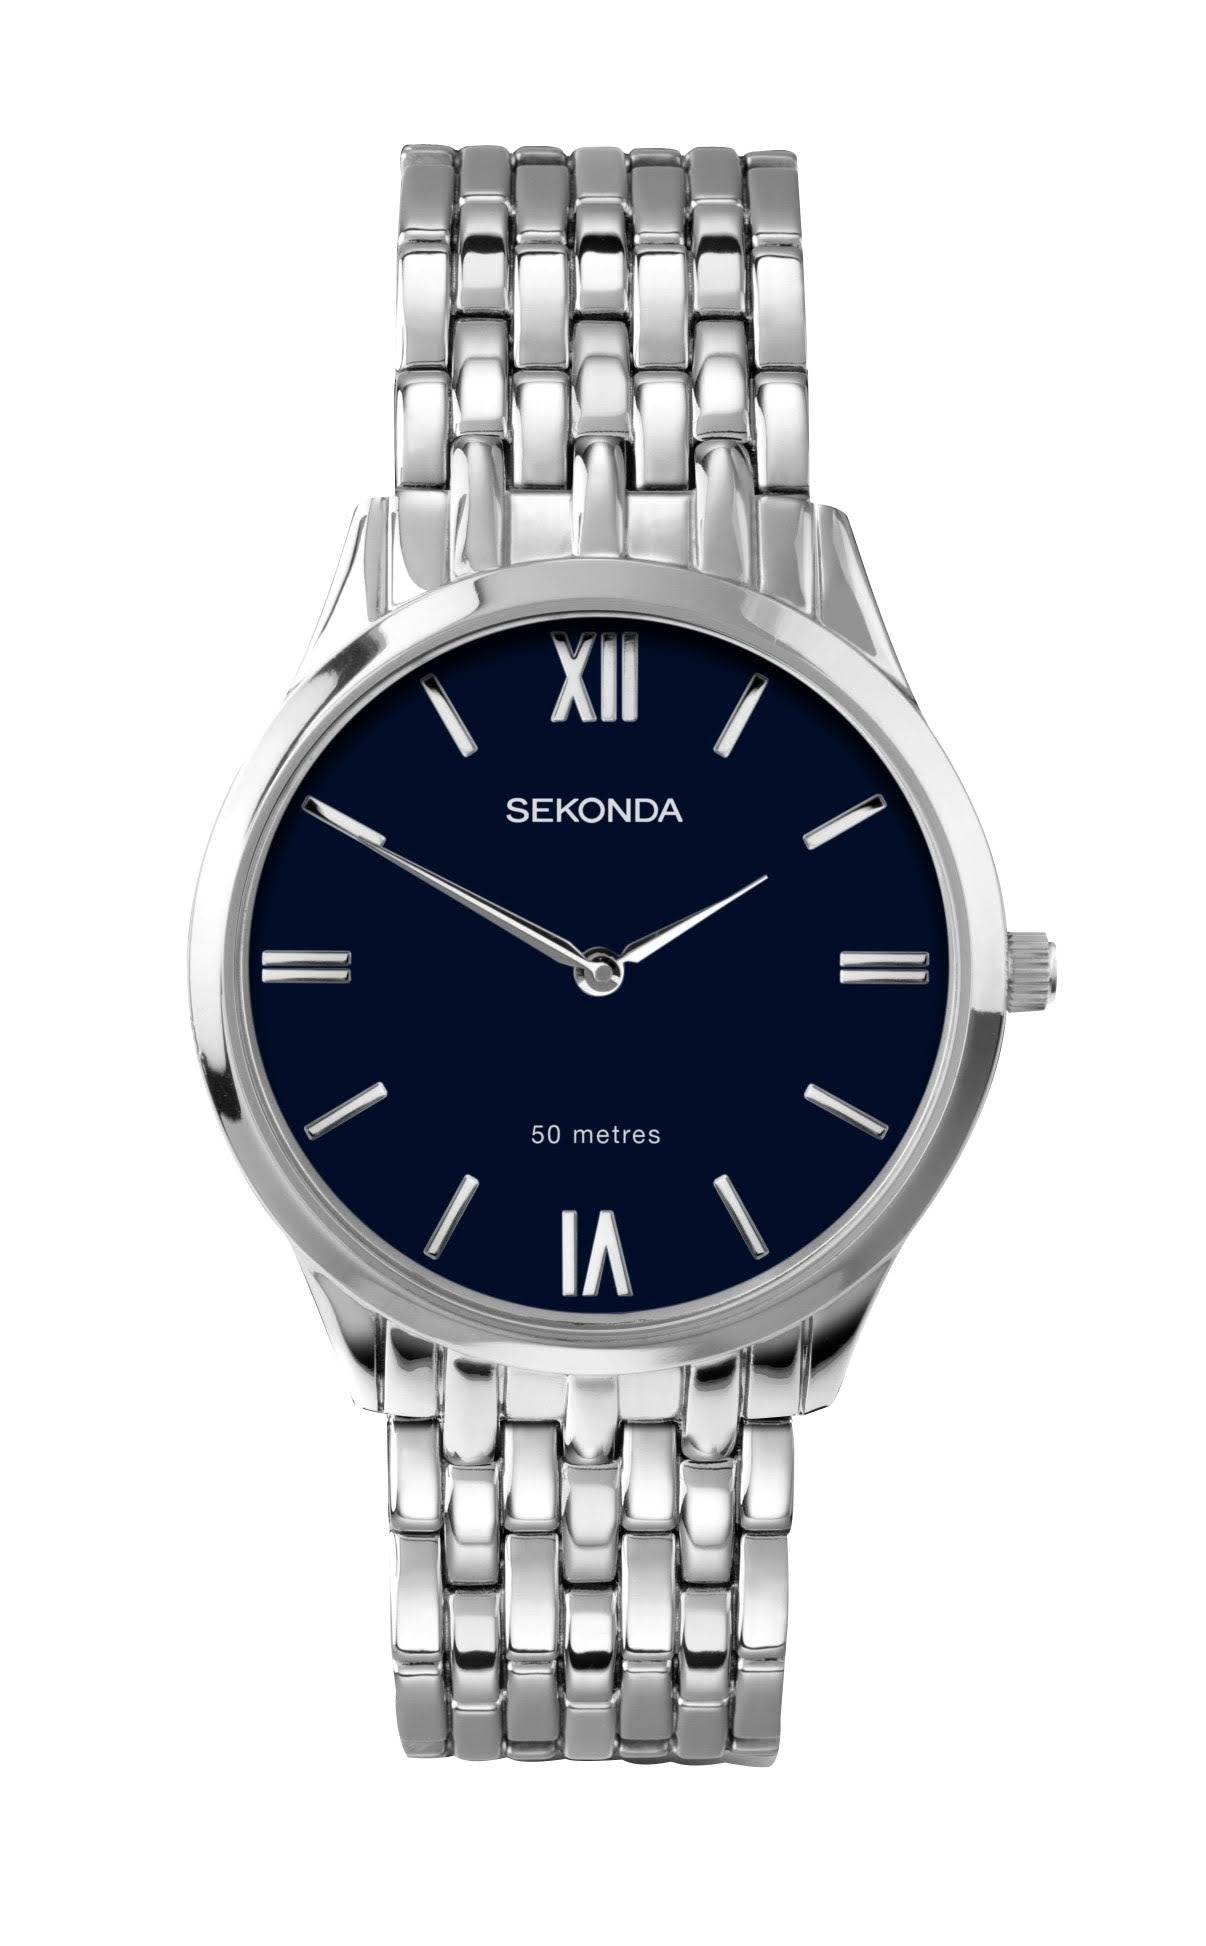 (1609) Sekonda Gents Watch with Blue Face